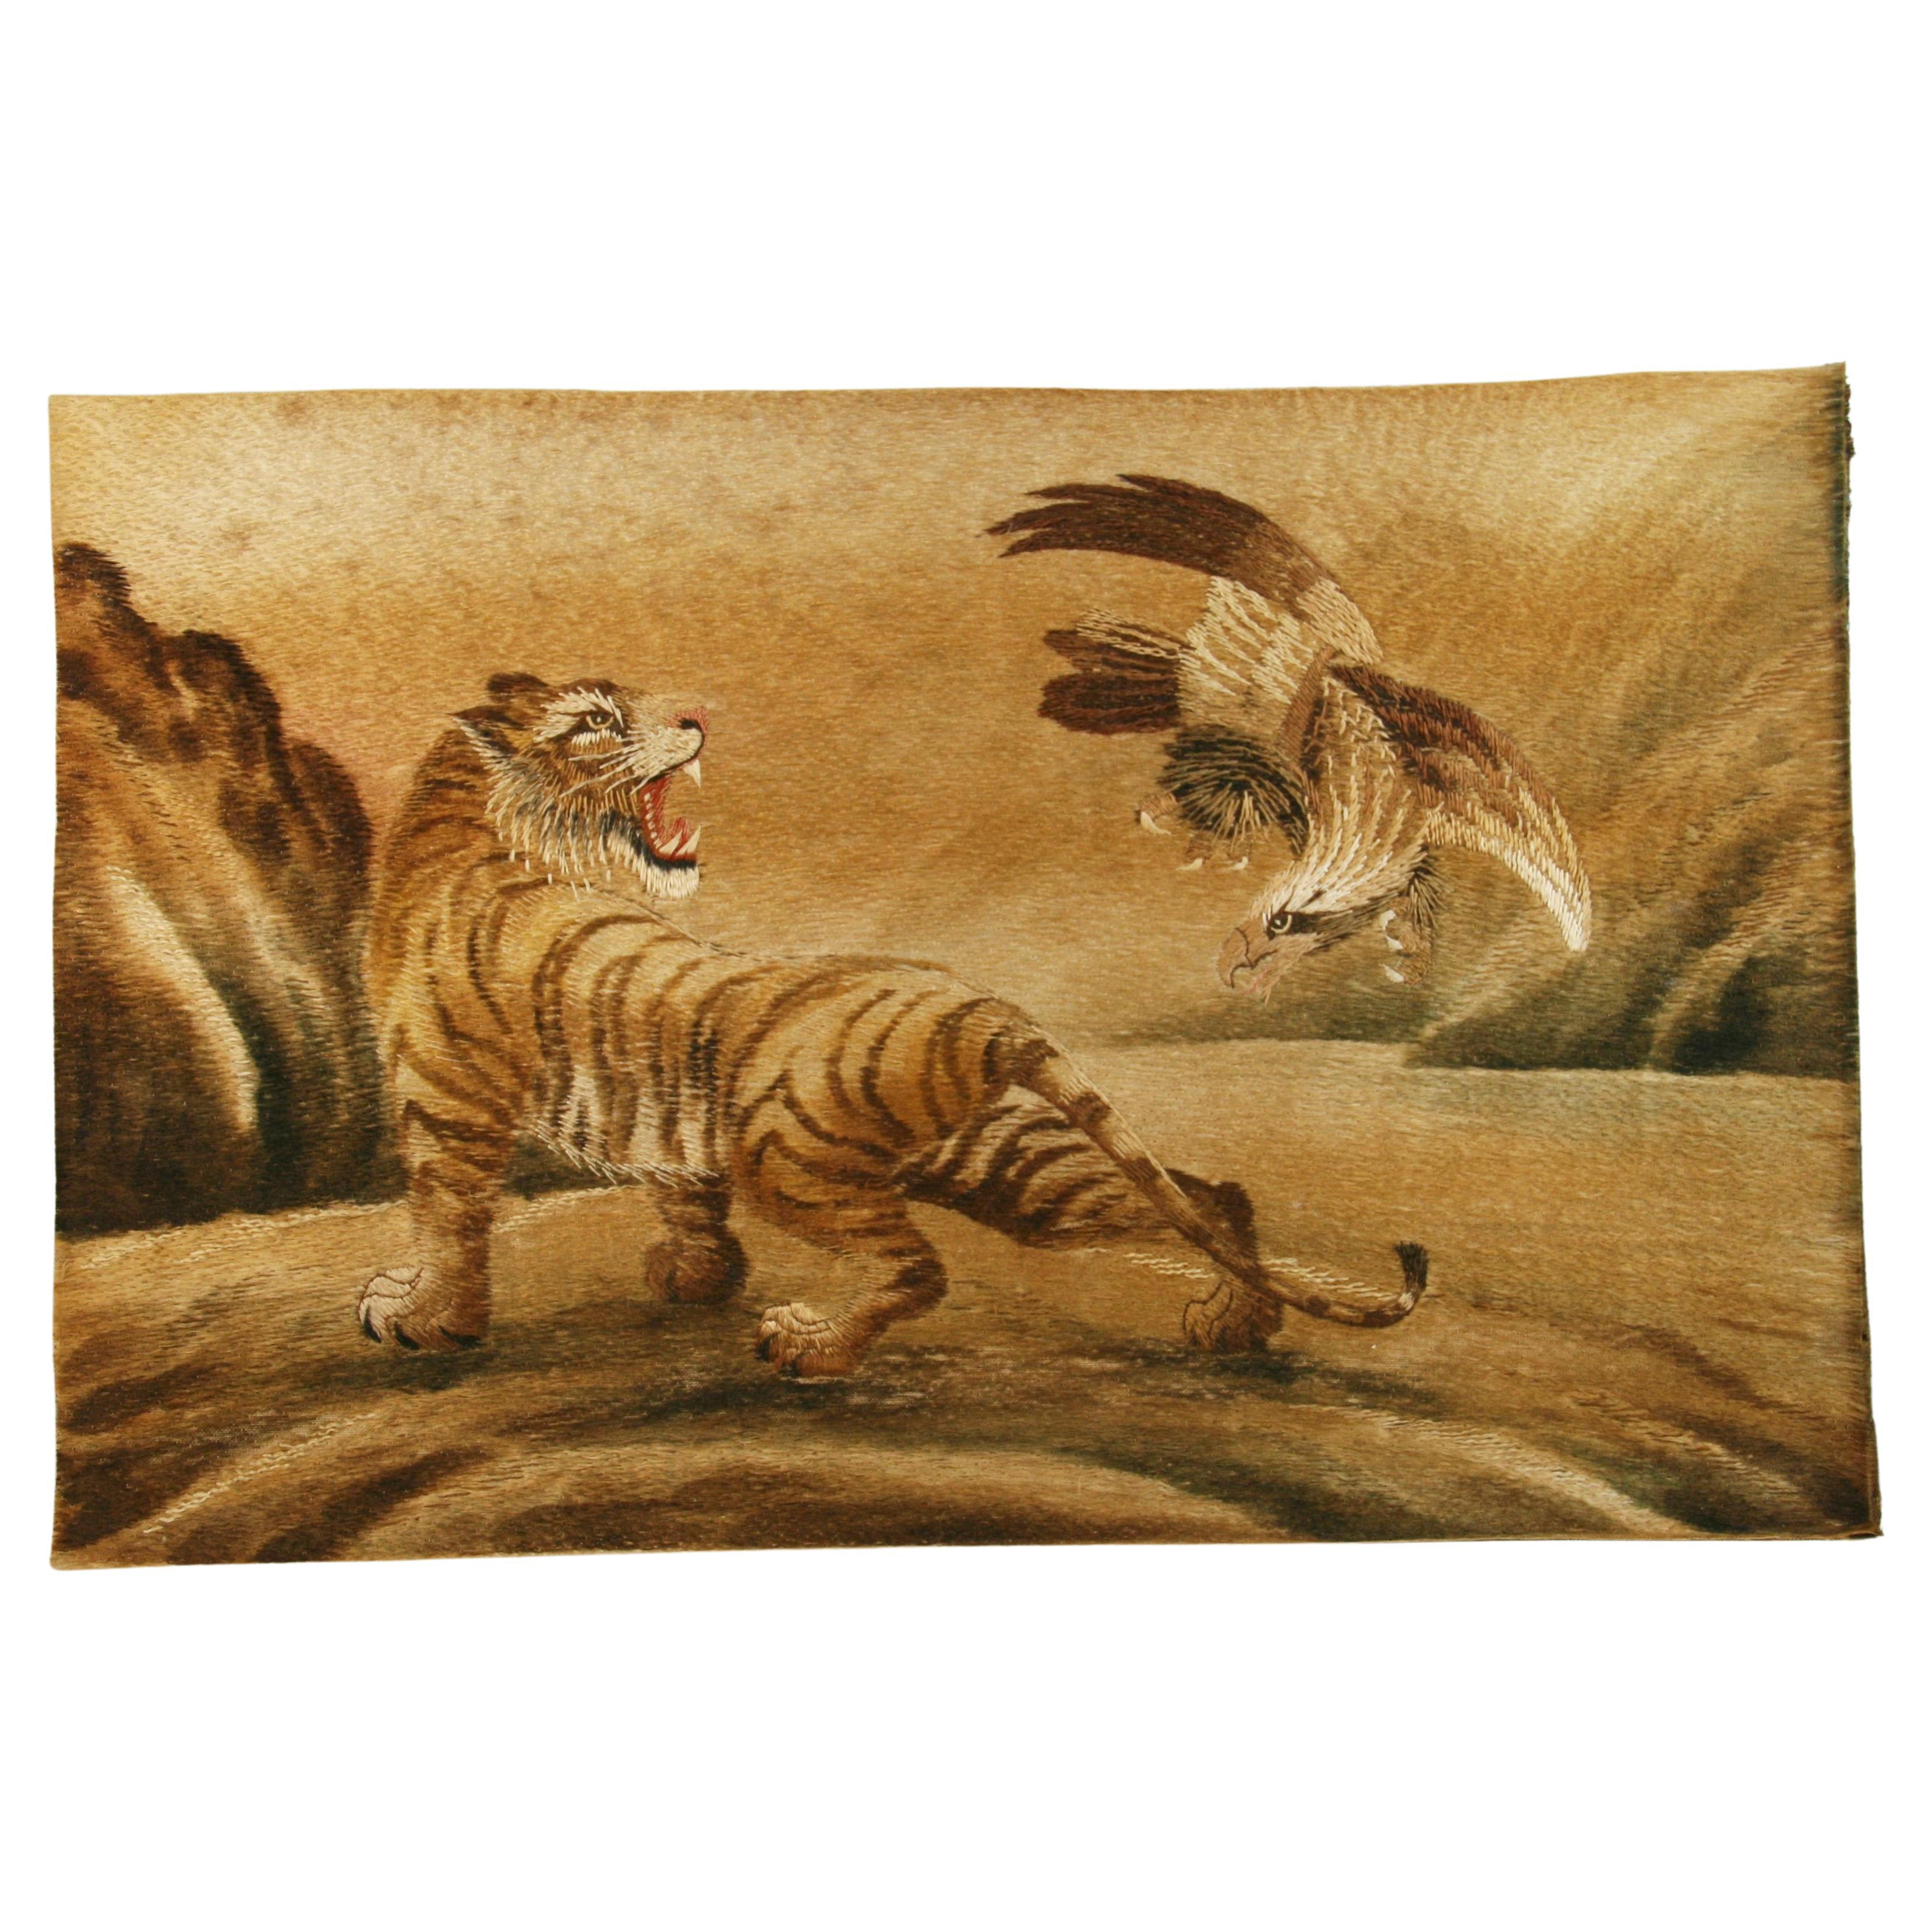 Japanese Silk Panel The Tiger and The Eagle 1920's